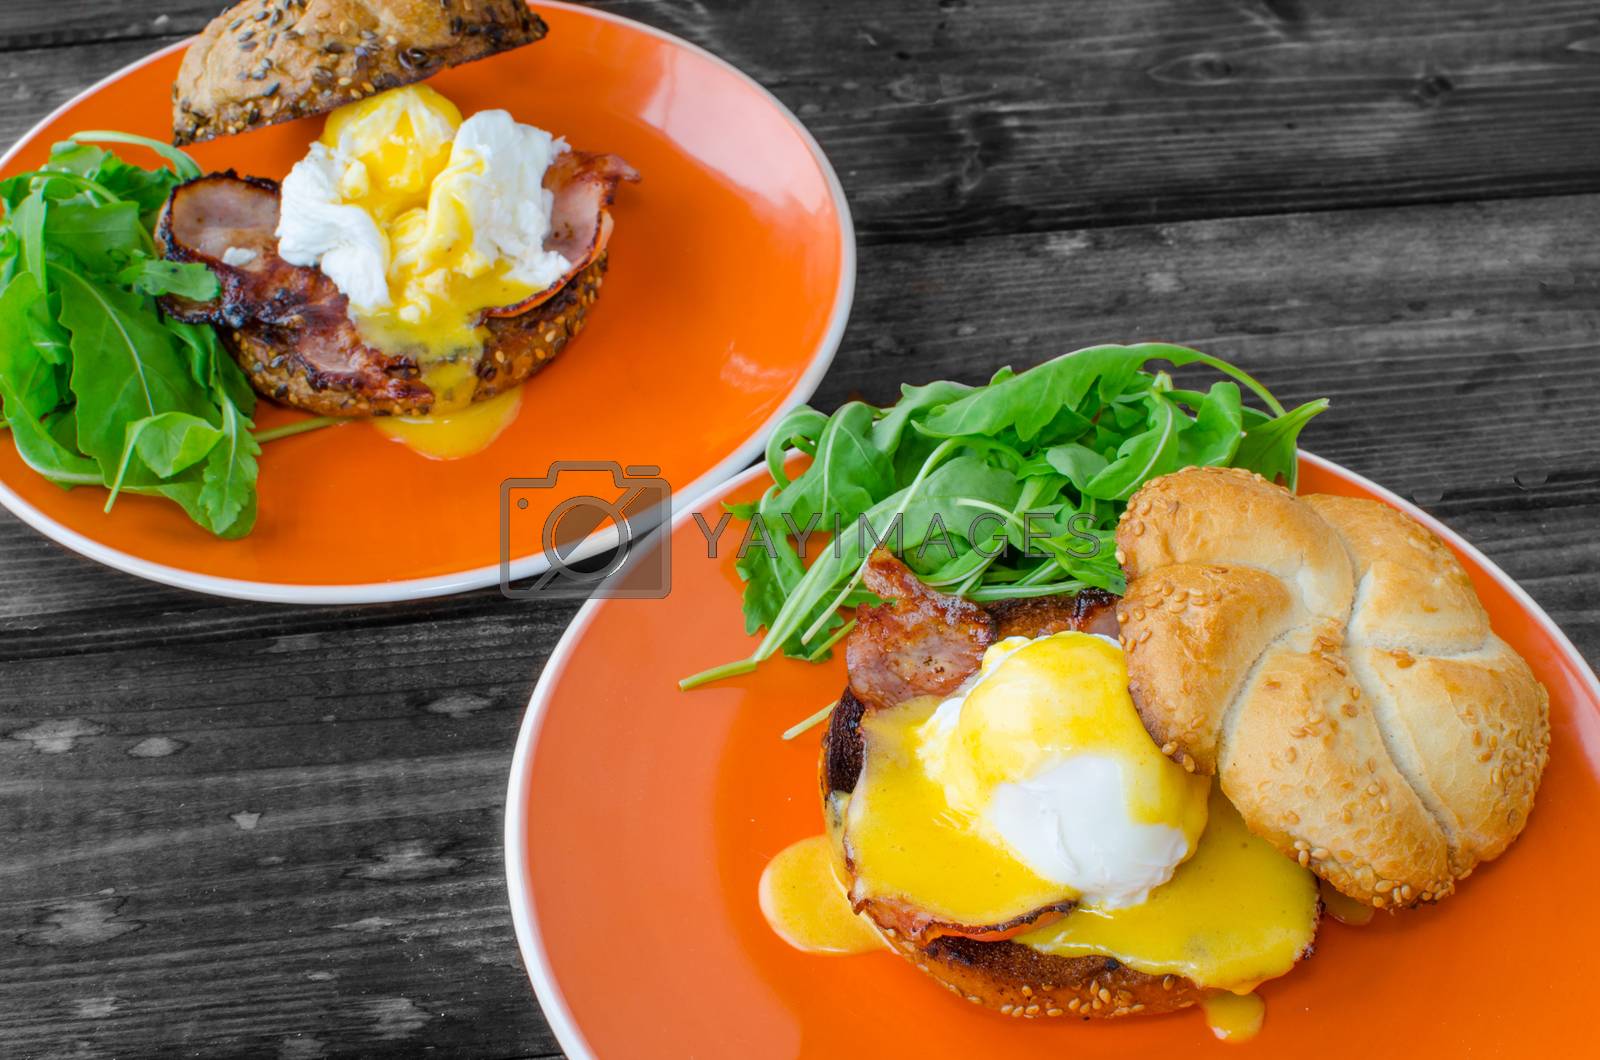 Royalty free image of English muffin with bacon, egg benedict by Peteer